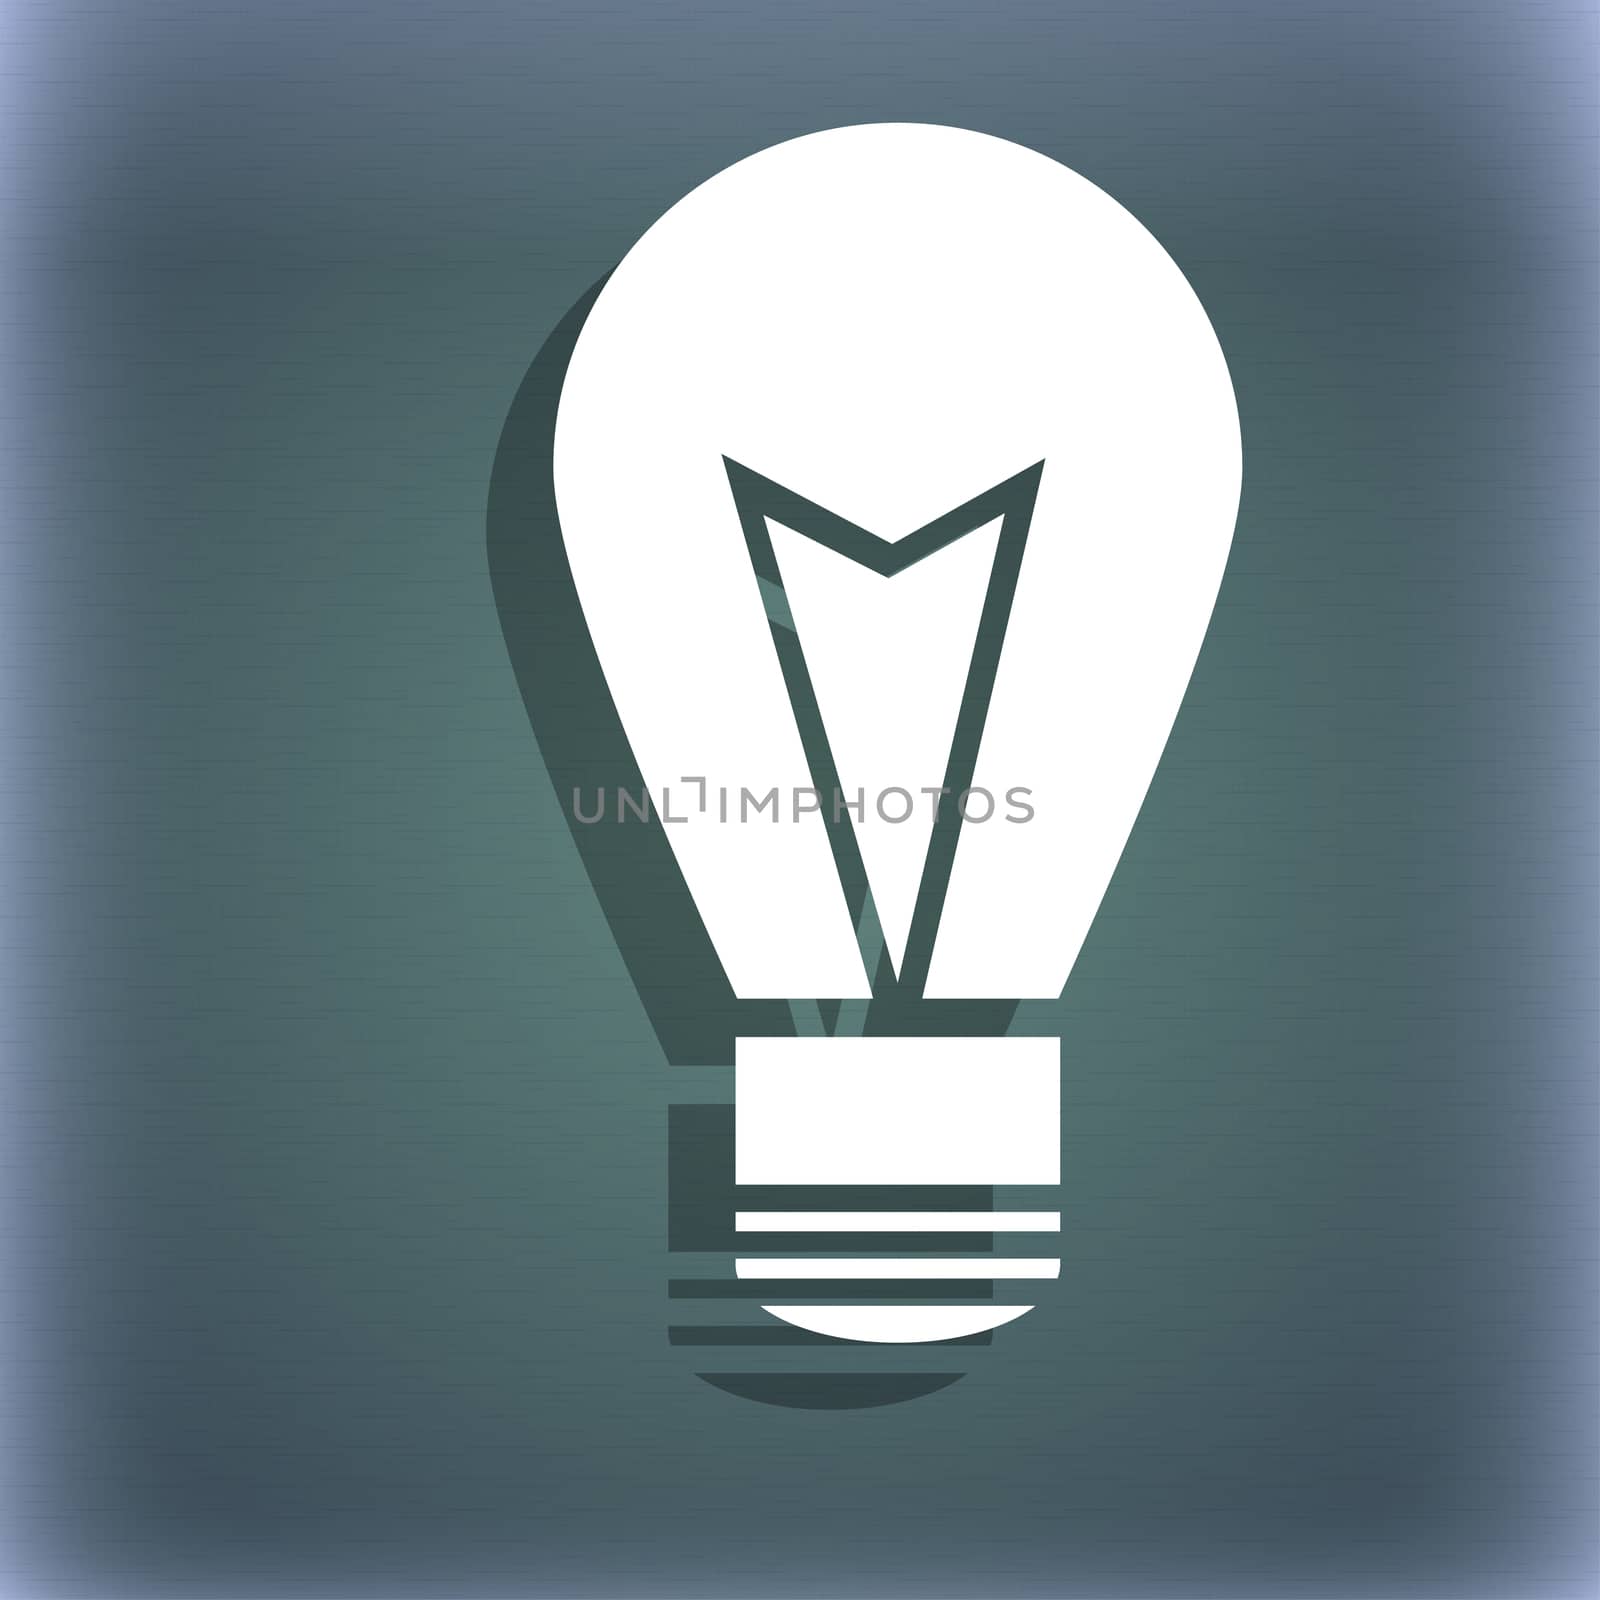 Light lamp sign icon. Idea symbol. Lightis on. On the blue-green abstract background with shadow and space for your text. illustration